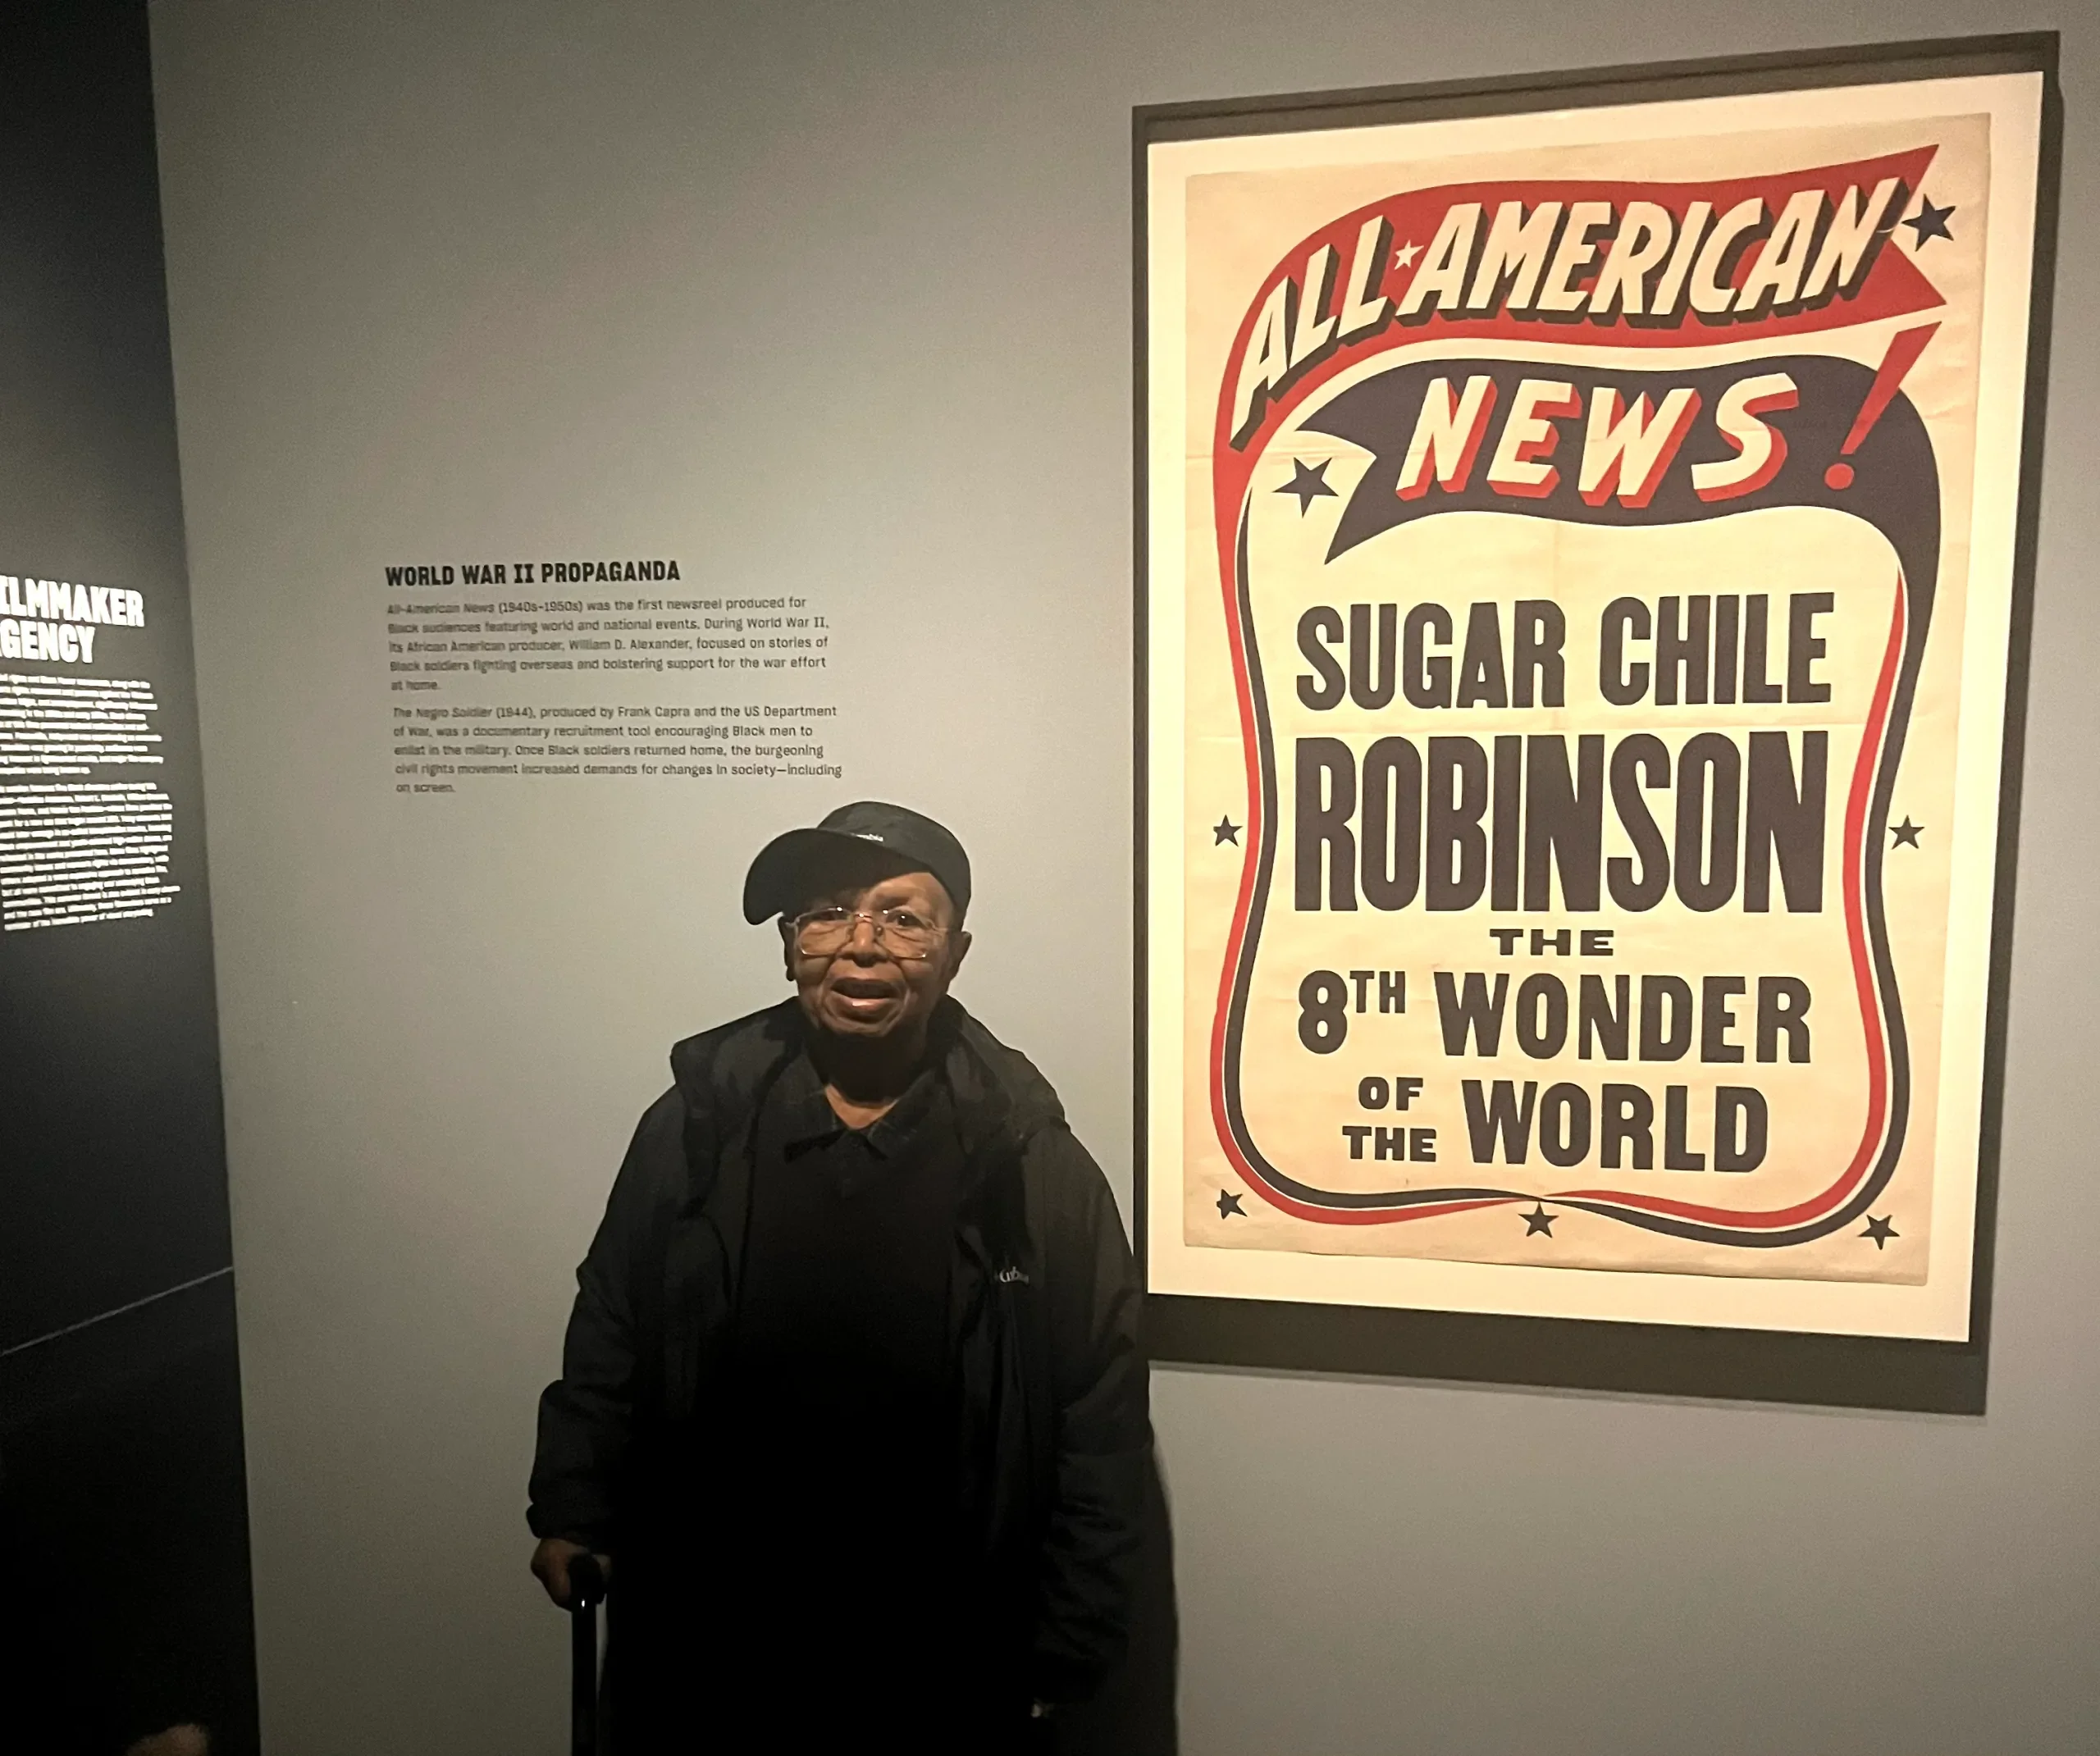 Sugar Chile Robinson of Detroit poses with a news poster of his name in the exhibition Regeneration: Black Cinema 1898 – 1971 at the Detroit Institute of Arts.